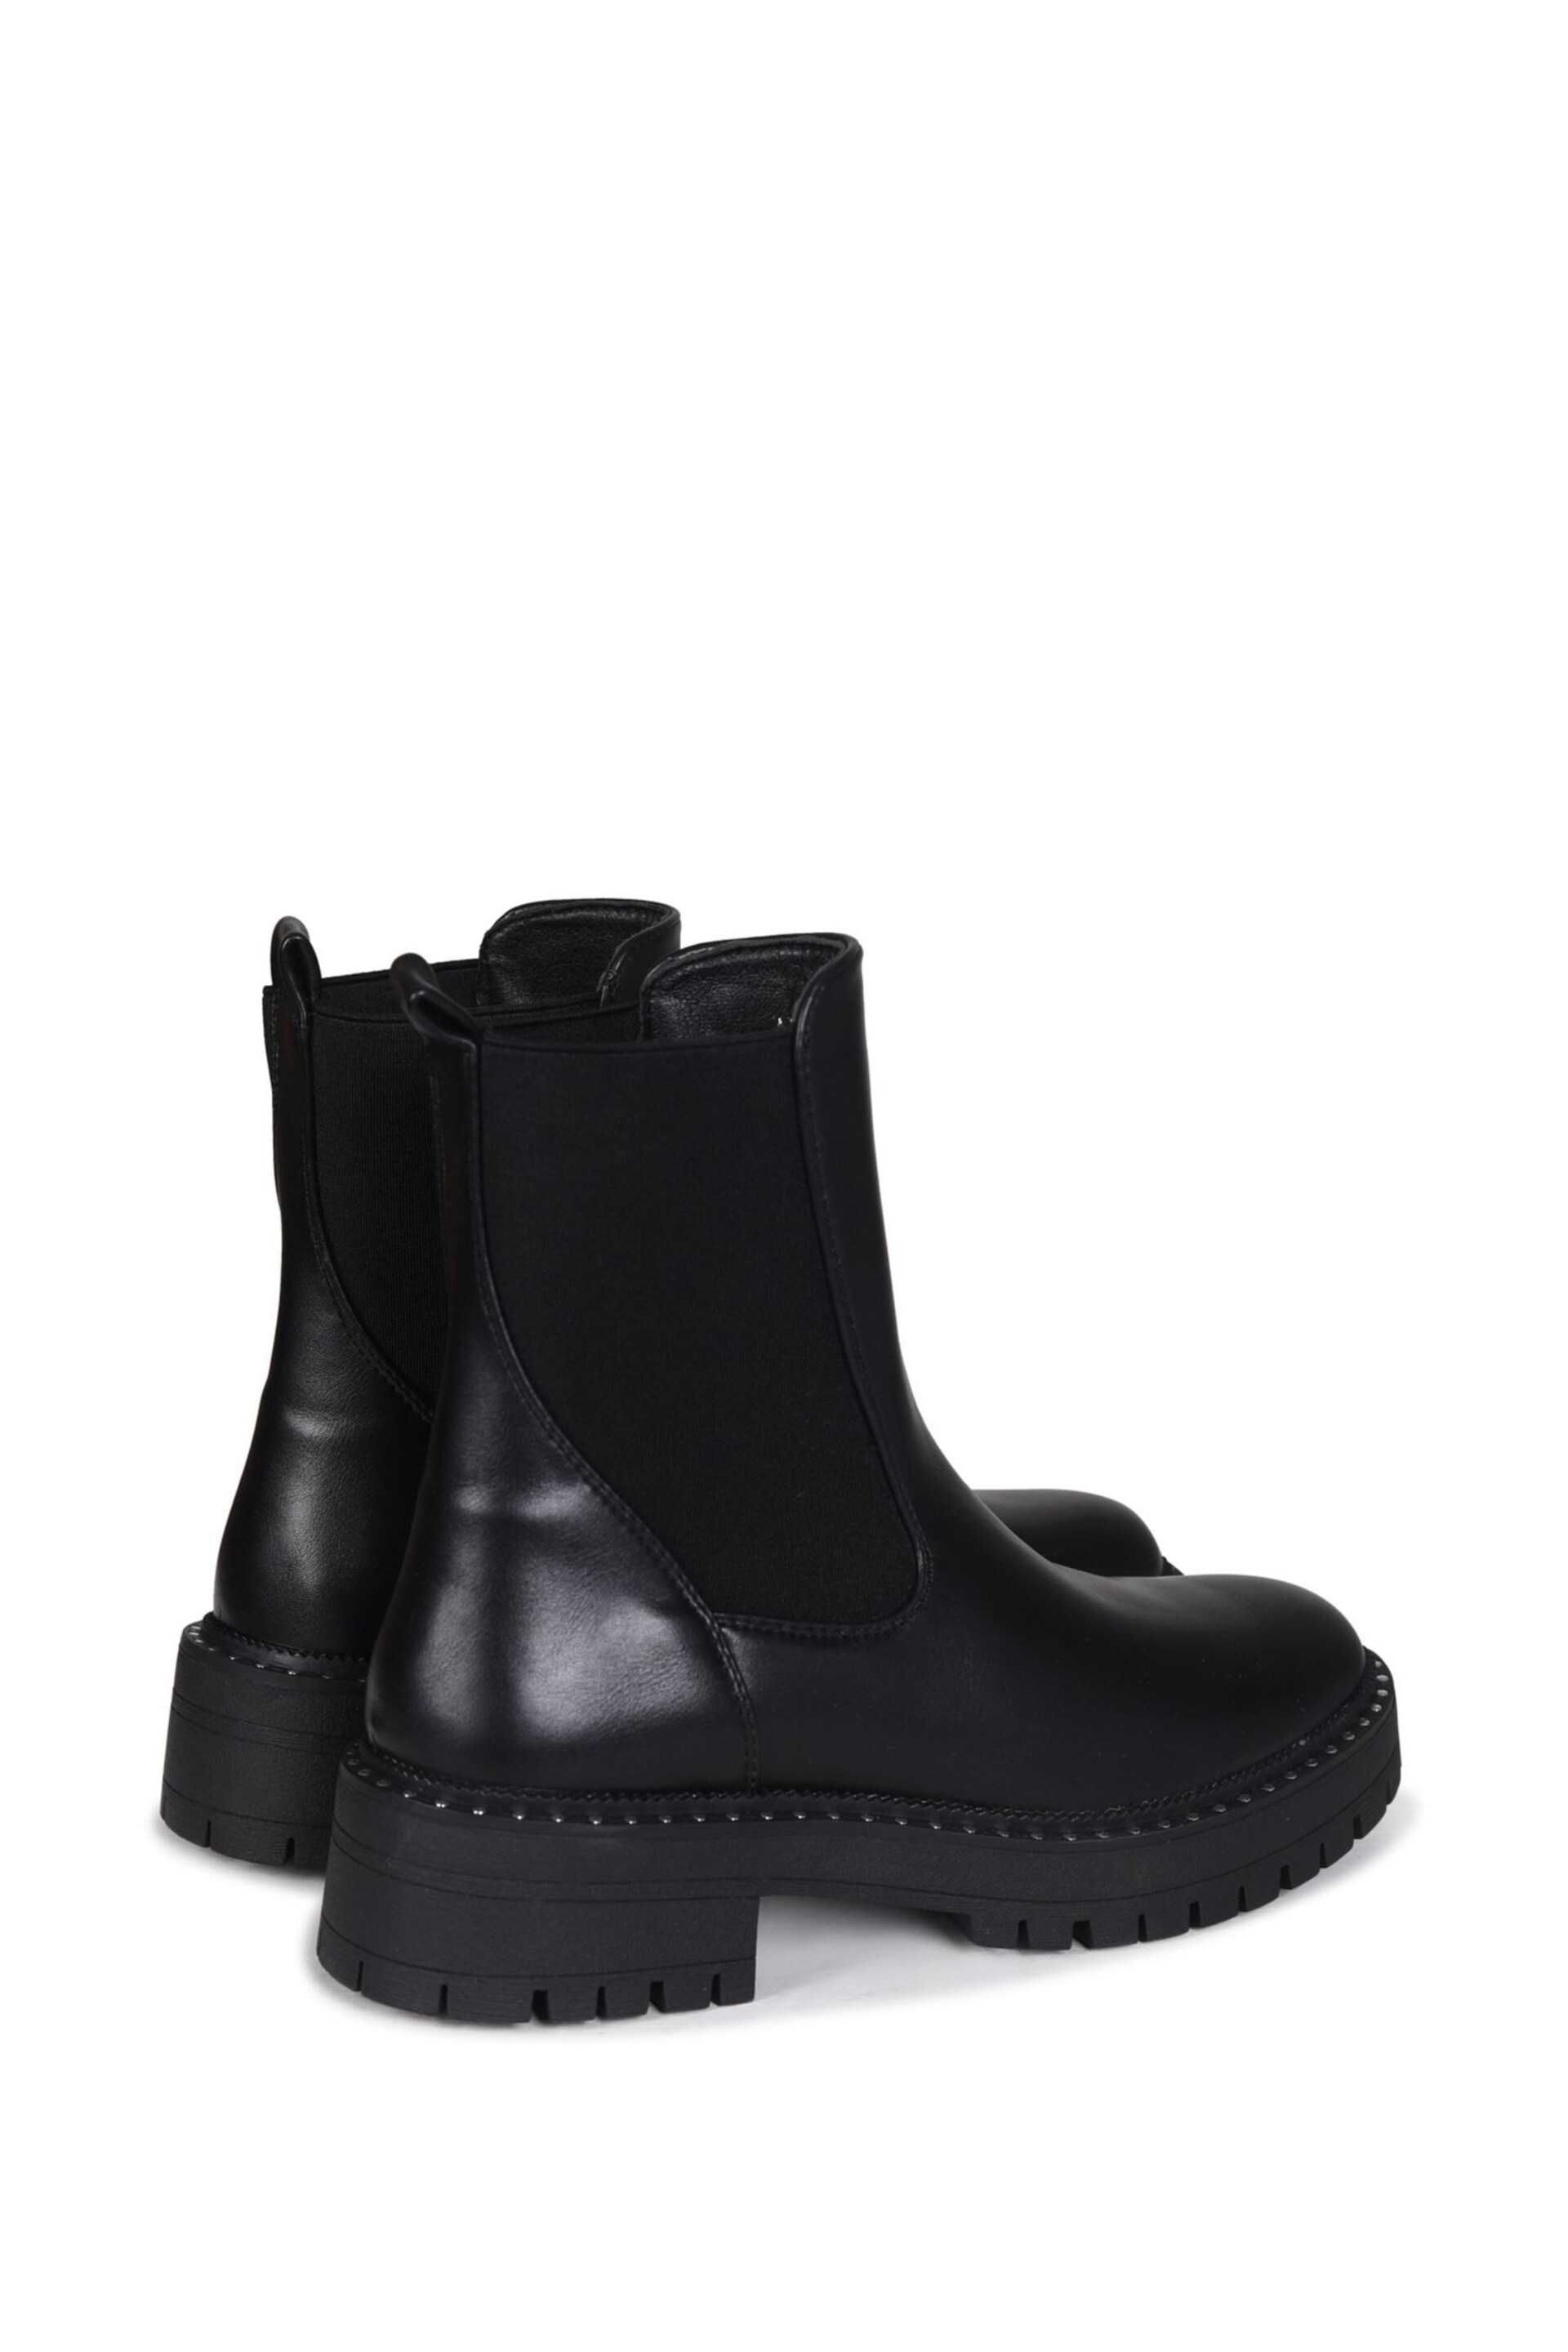 Linzi Black Faux Leather Andrea Soft Silver Stud Detail Sole Chelsea Boot - Image 5 of 5